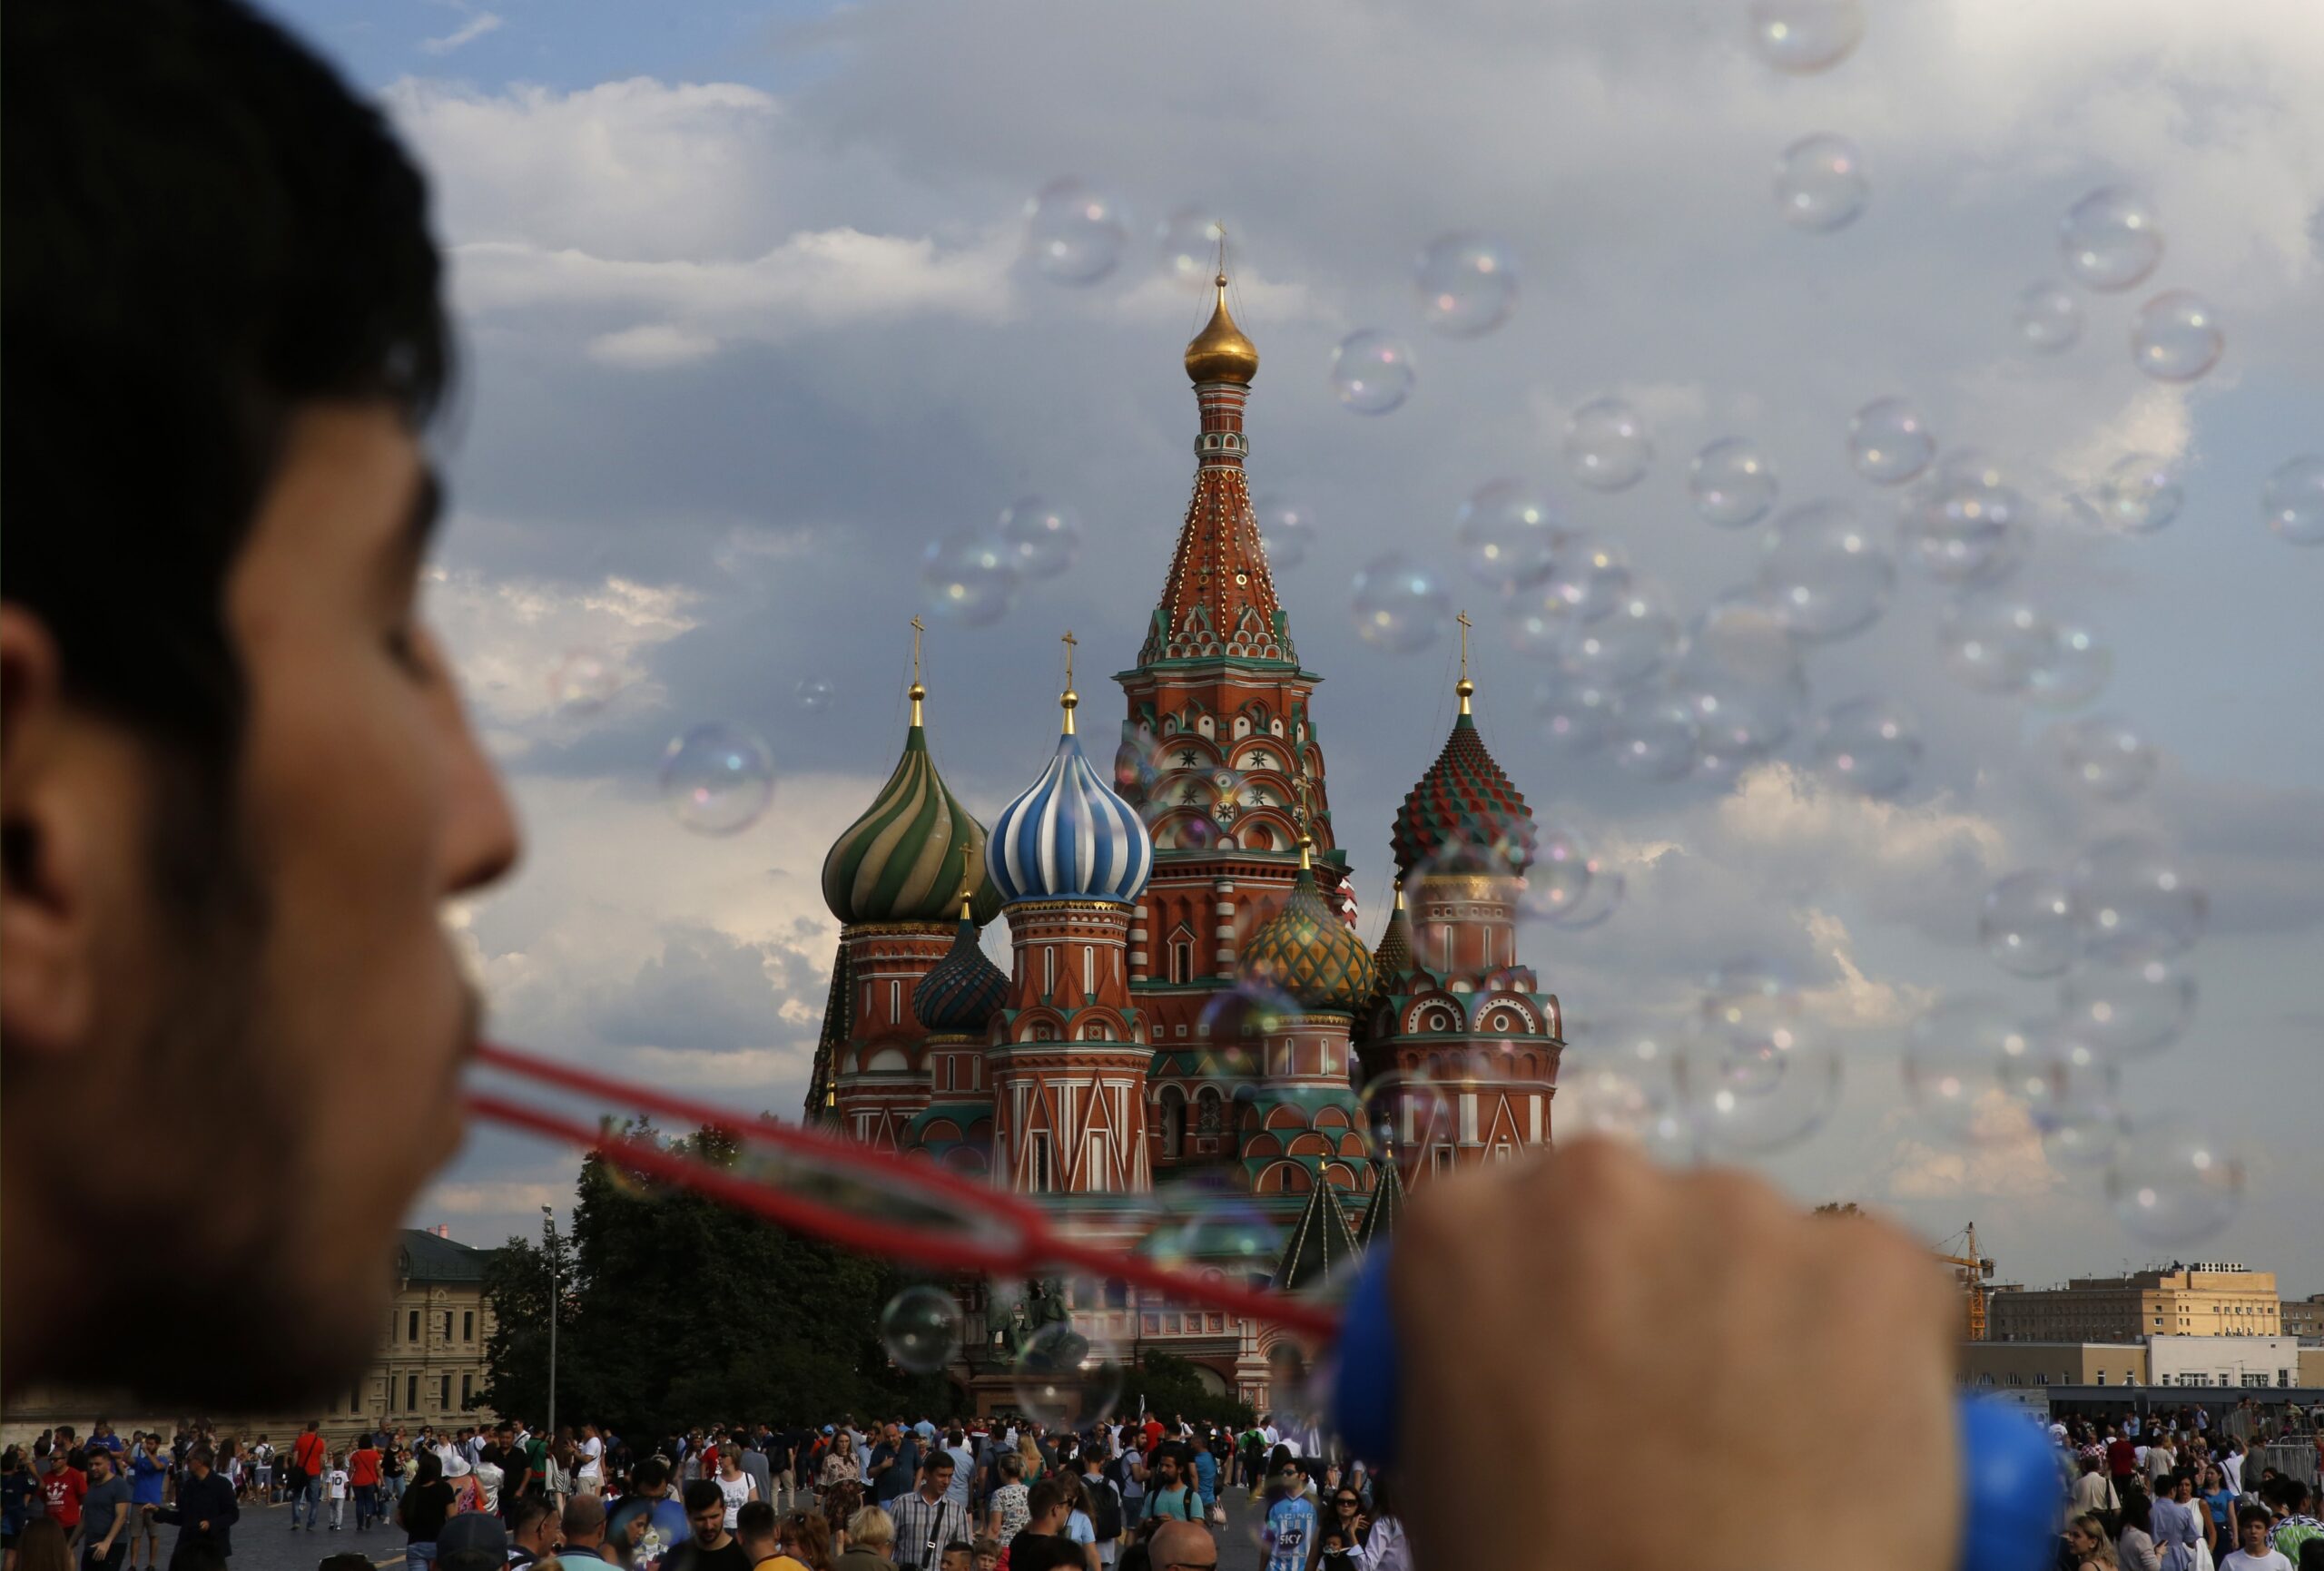 A young man blows bubbles in Red Square during the 2018 soccer World Cup